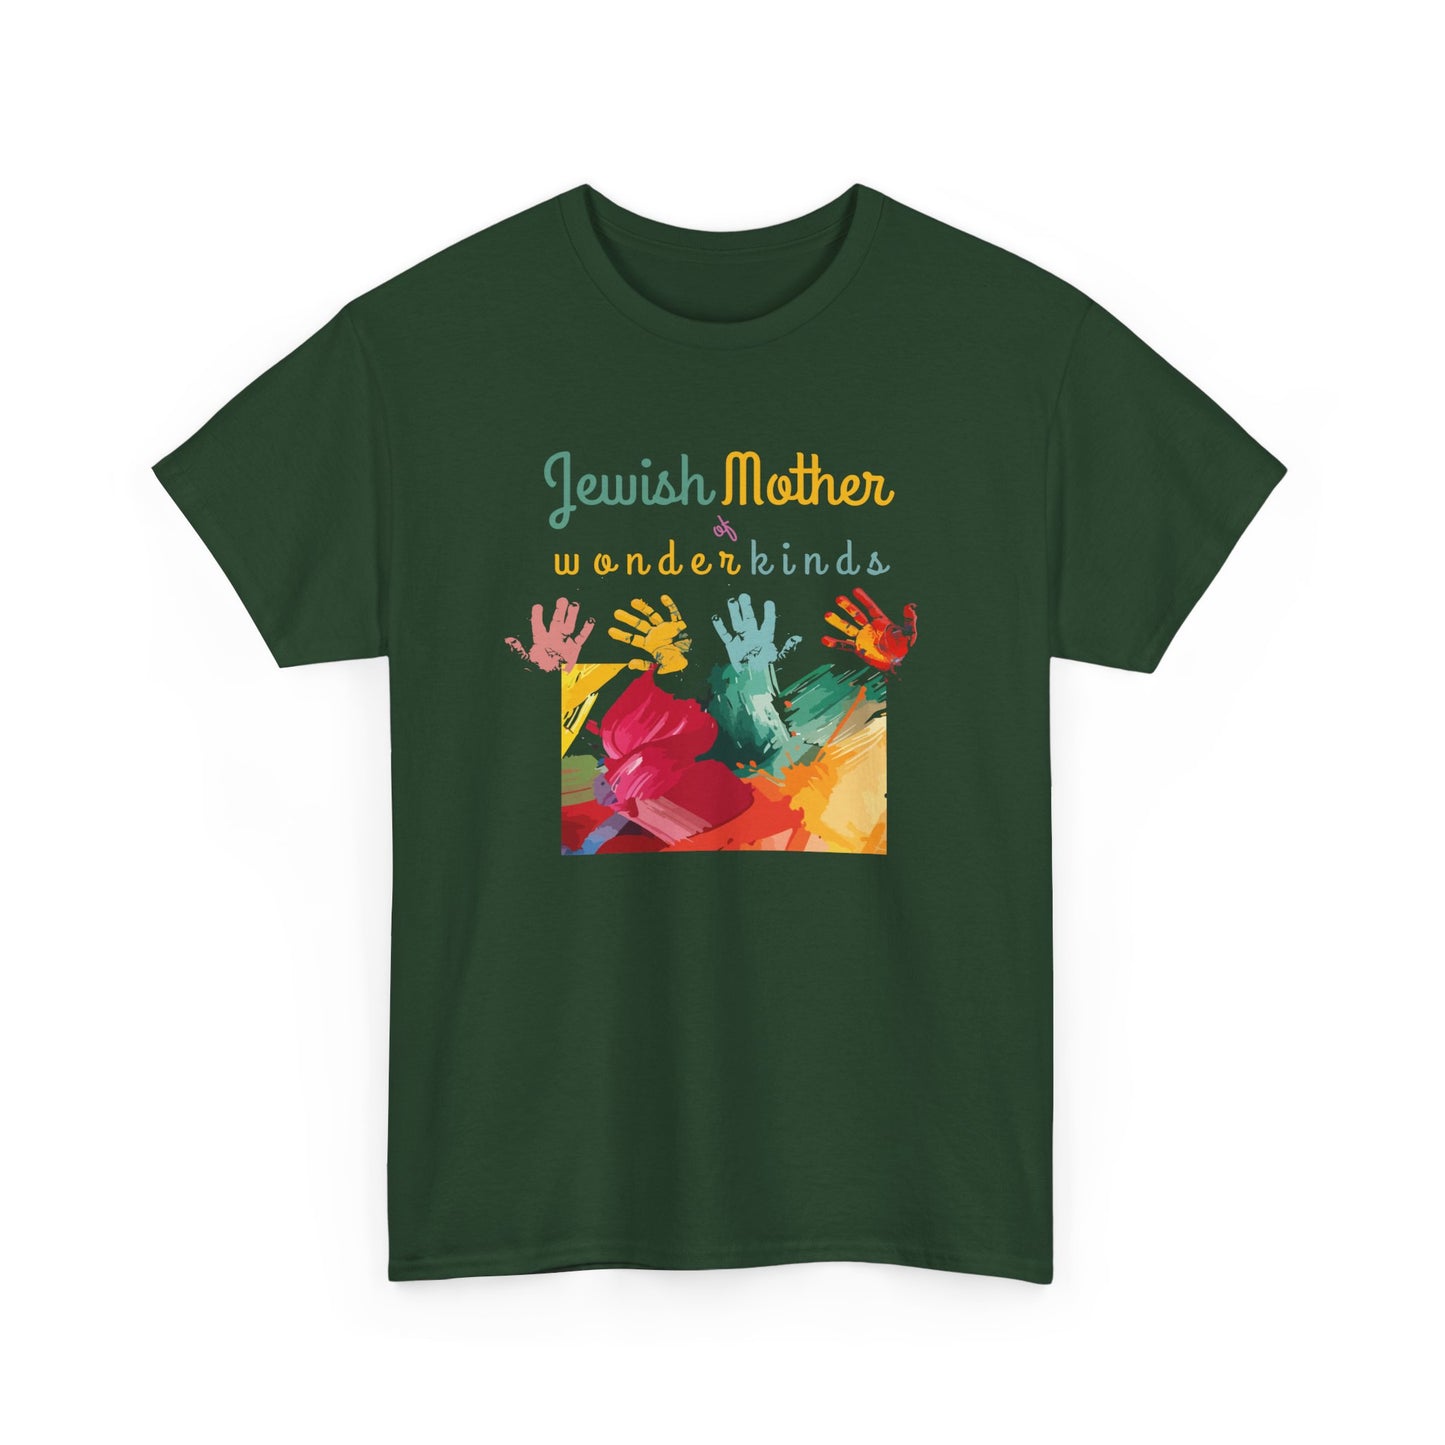 Mother's day, Jewish Mother of wunderkinds, Yiddishe mame, Cotton Unisex Tee Shirt